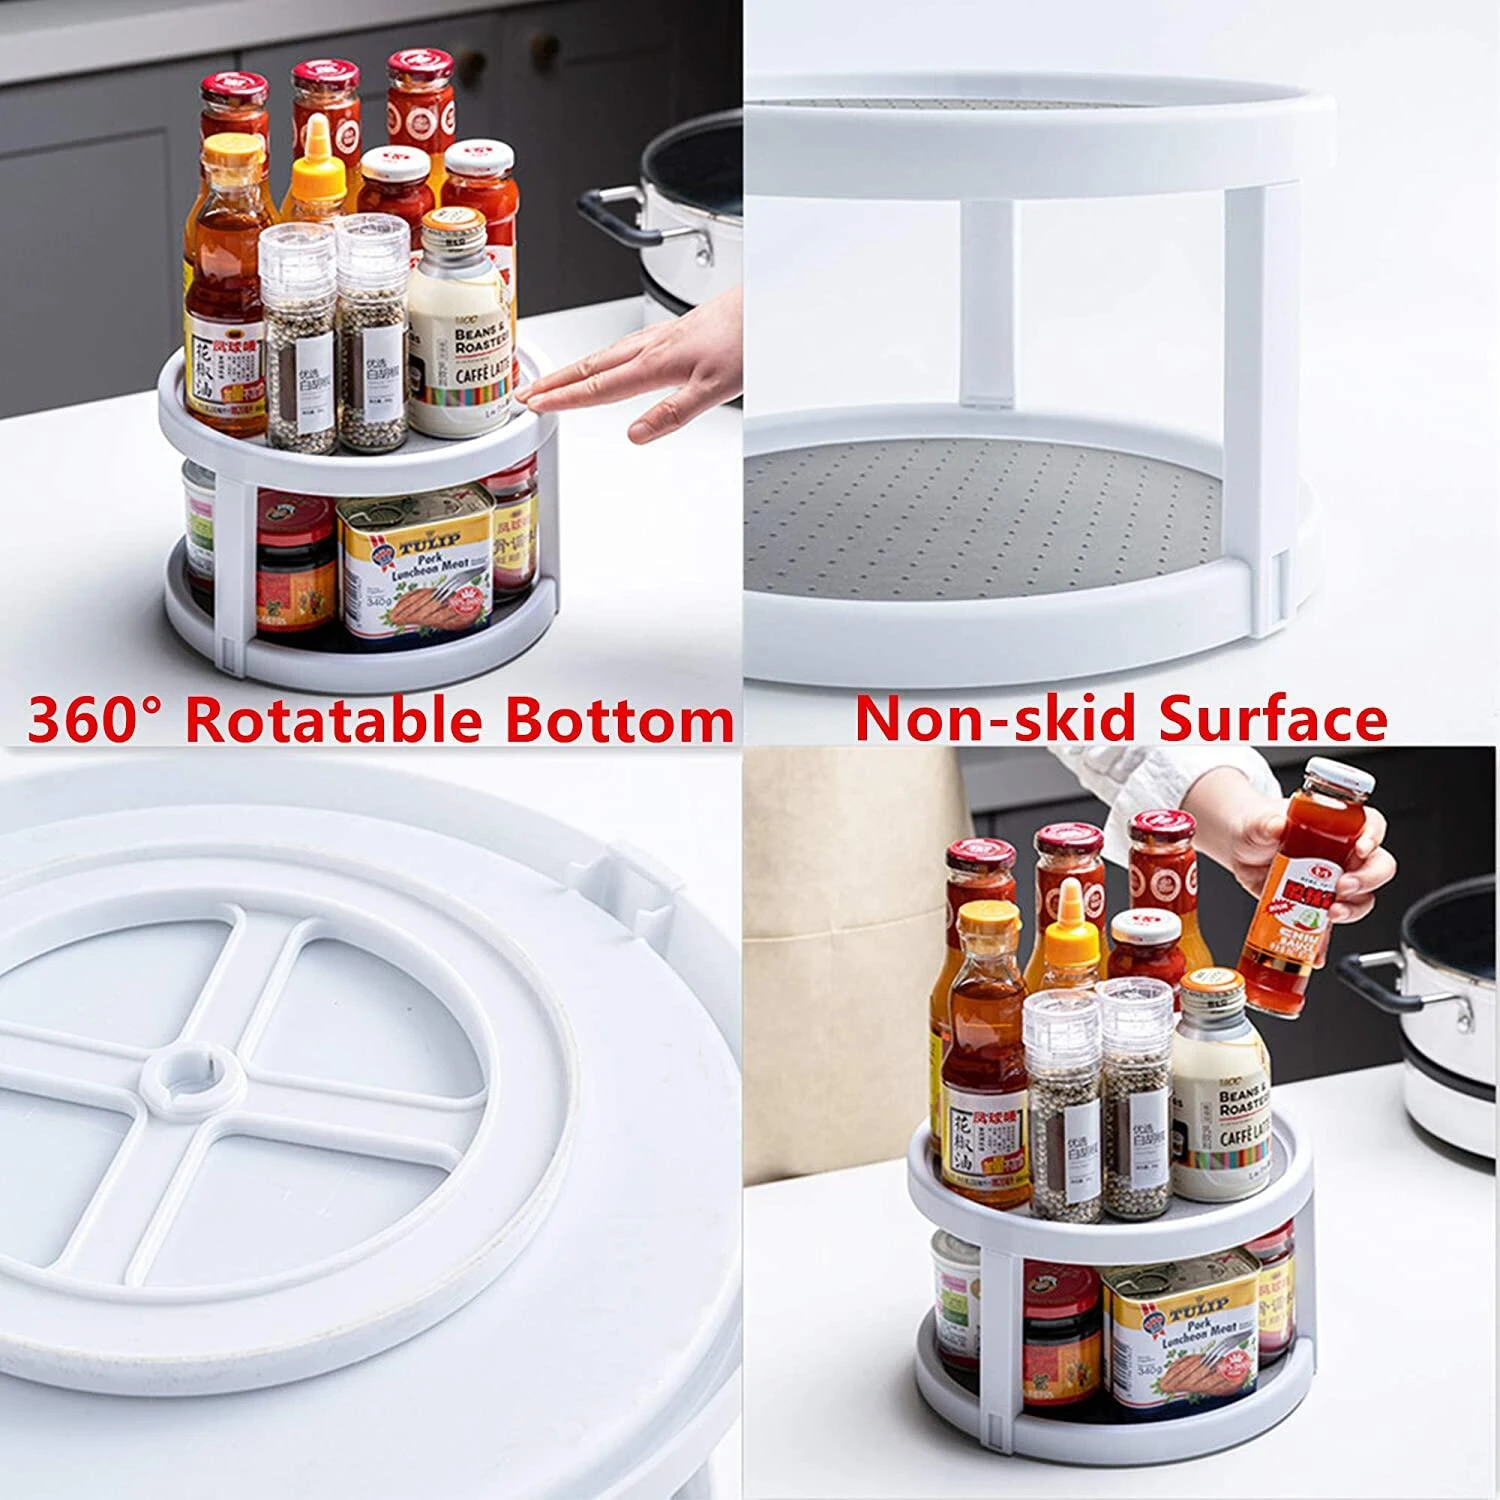 2 Tier Lazy Susan Turntable Kitchen rack Plastic Clear Organization Storage Container Bin Condiments for Cabinet Pantry